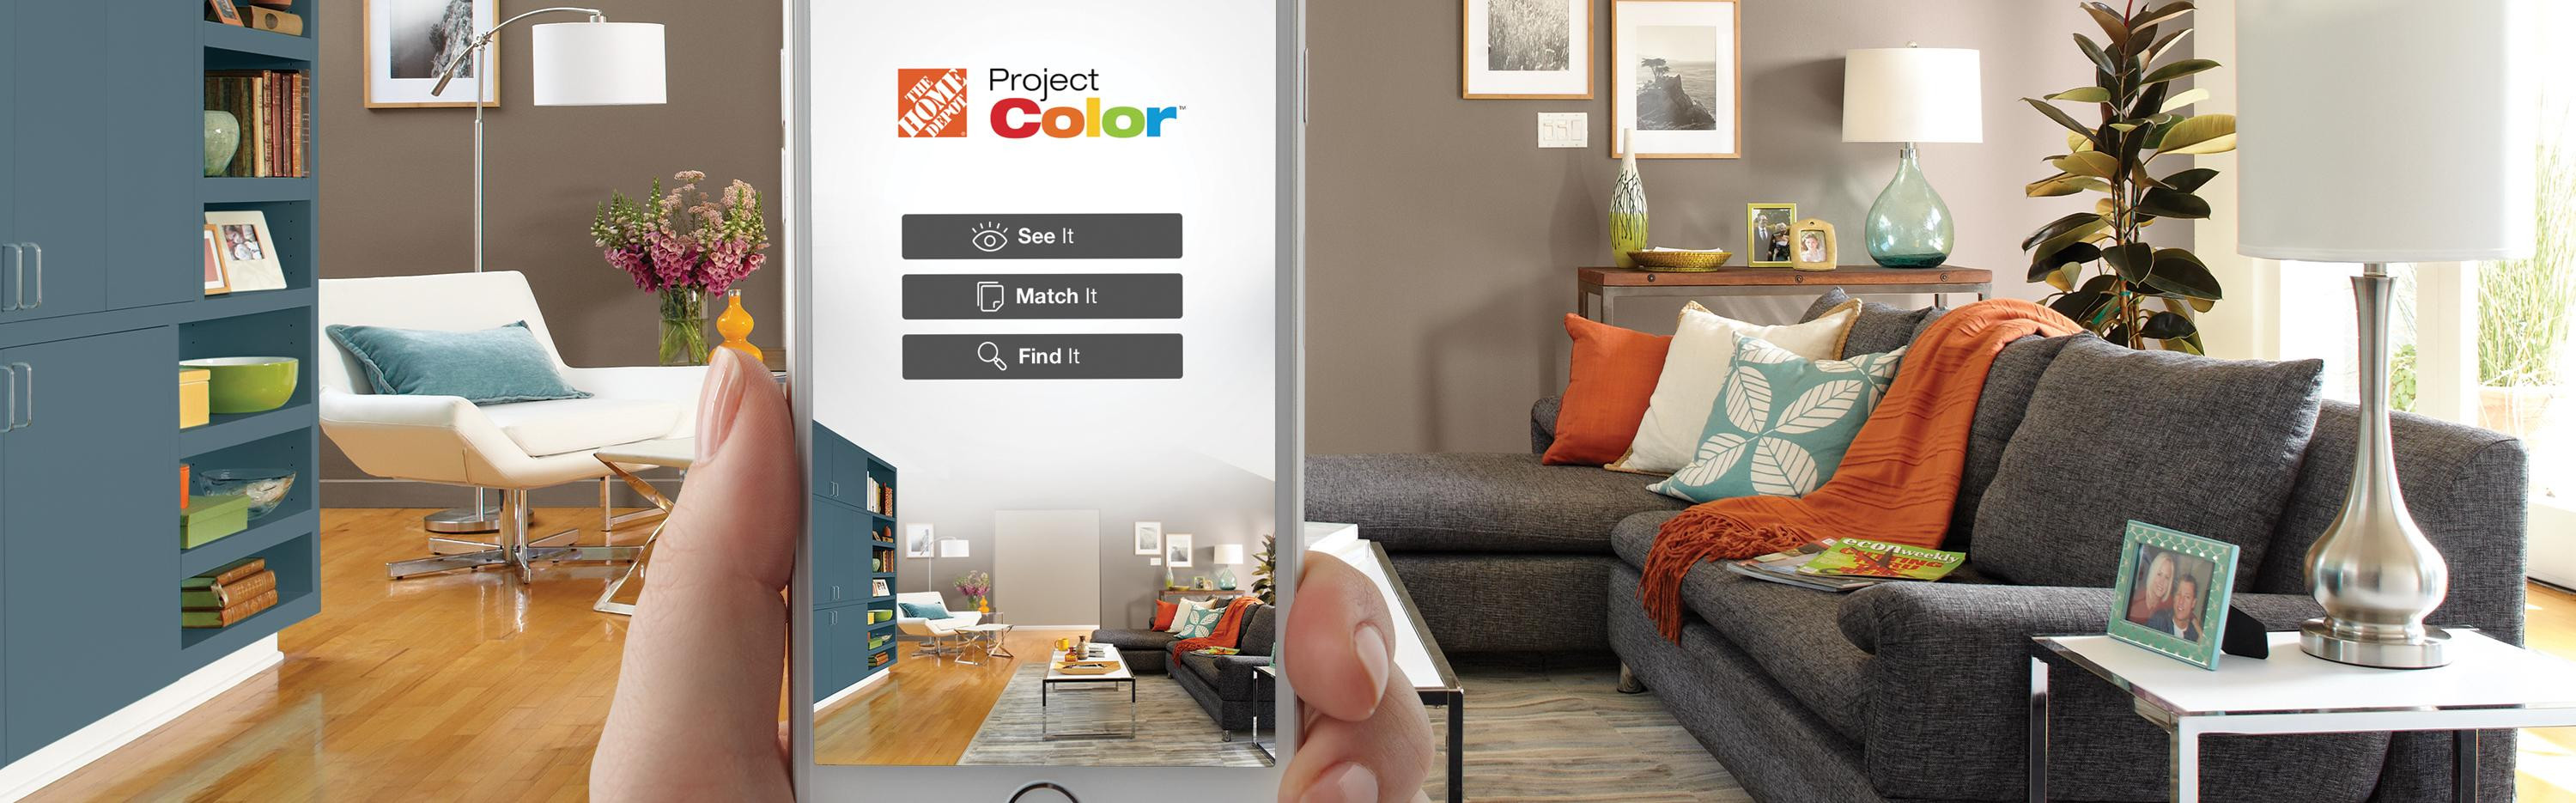 21 Nice Paint or Hardwood Floors First 2024 free download paint or hardwood floors first of the home depot new technology shows you the perfect paint color regarding thd project color app on an iphone